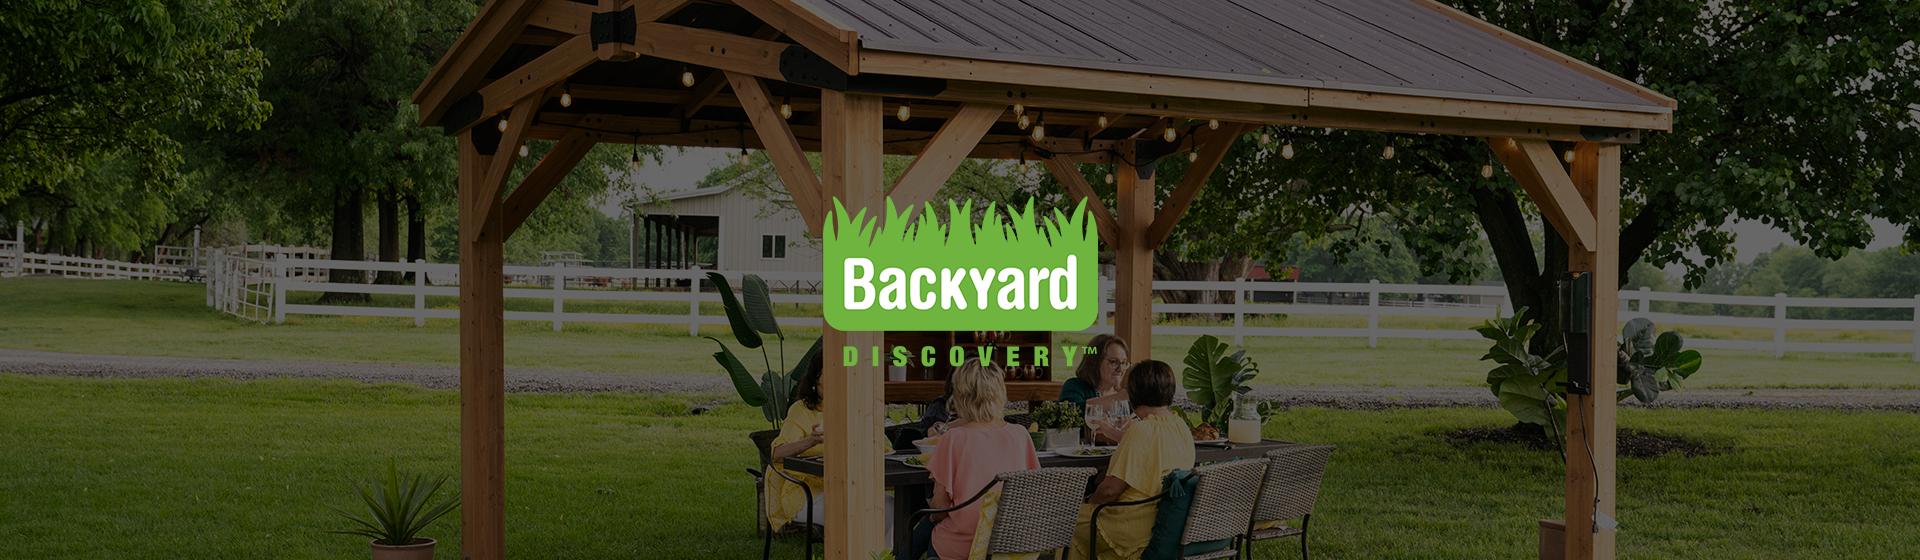 Backyard discovery website redesign